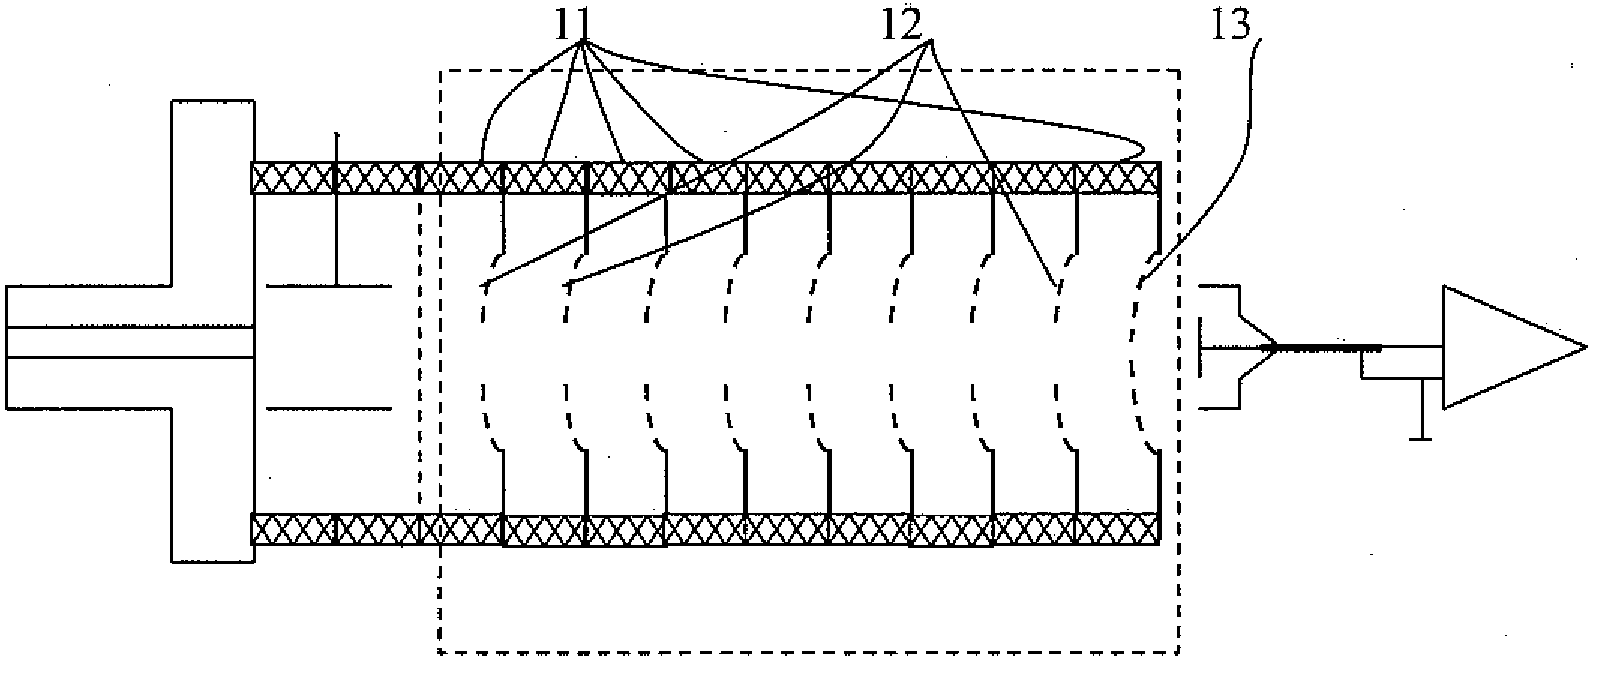 Drift tube structure for ion mobility spectrometer